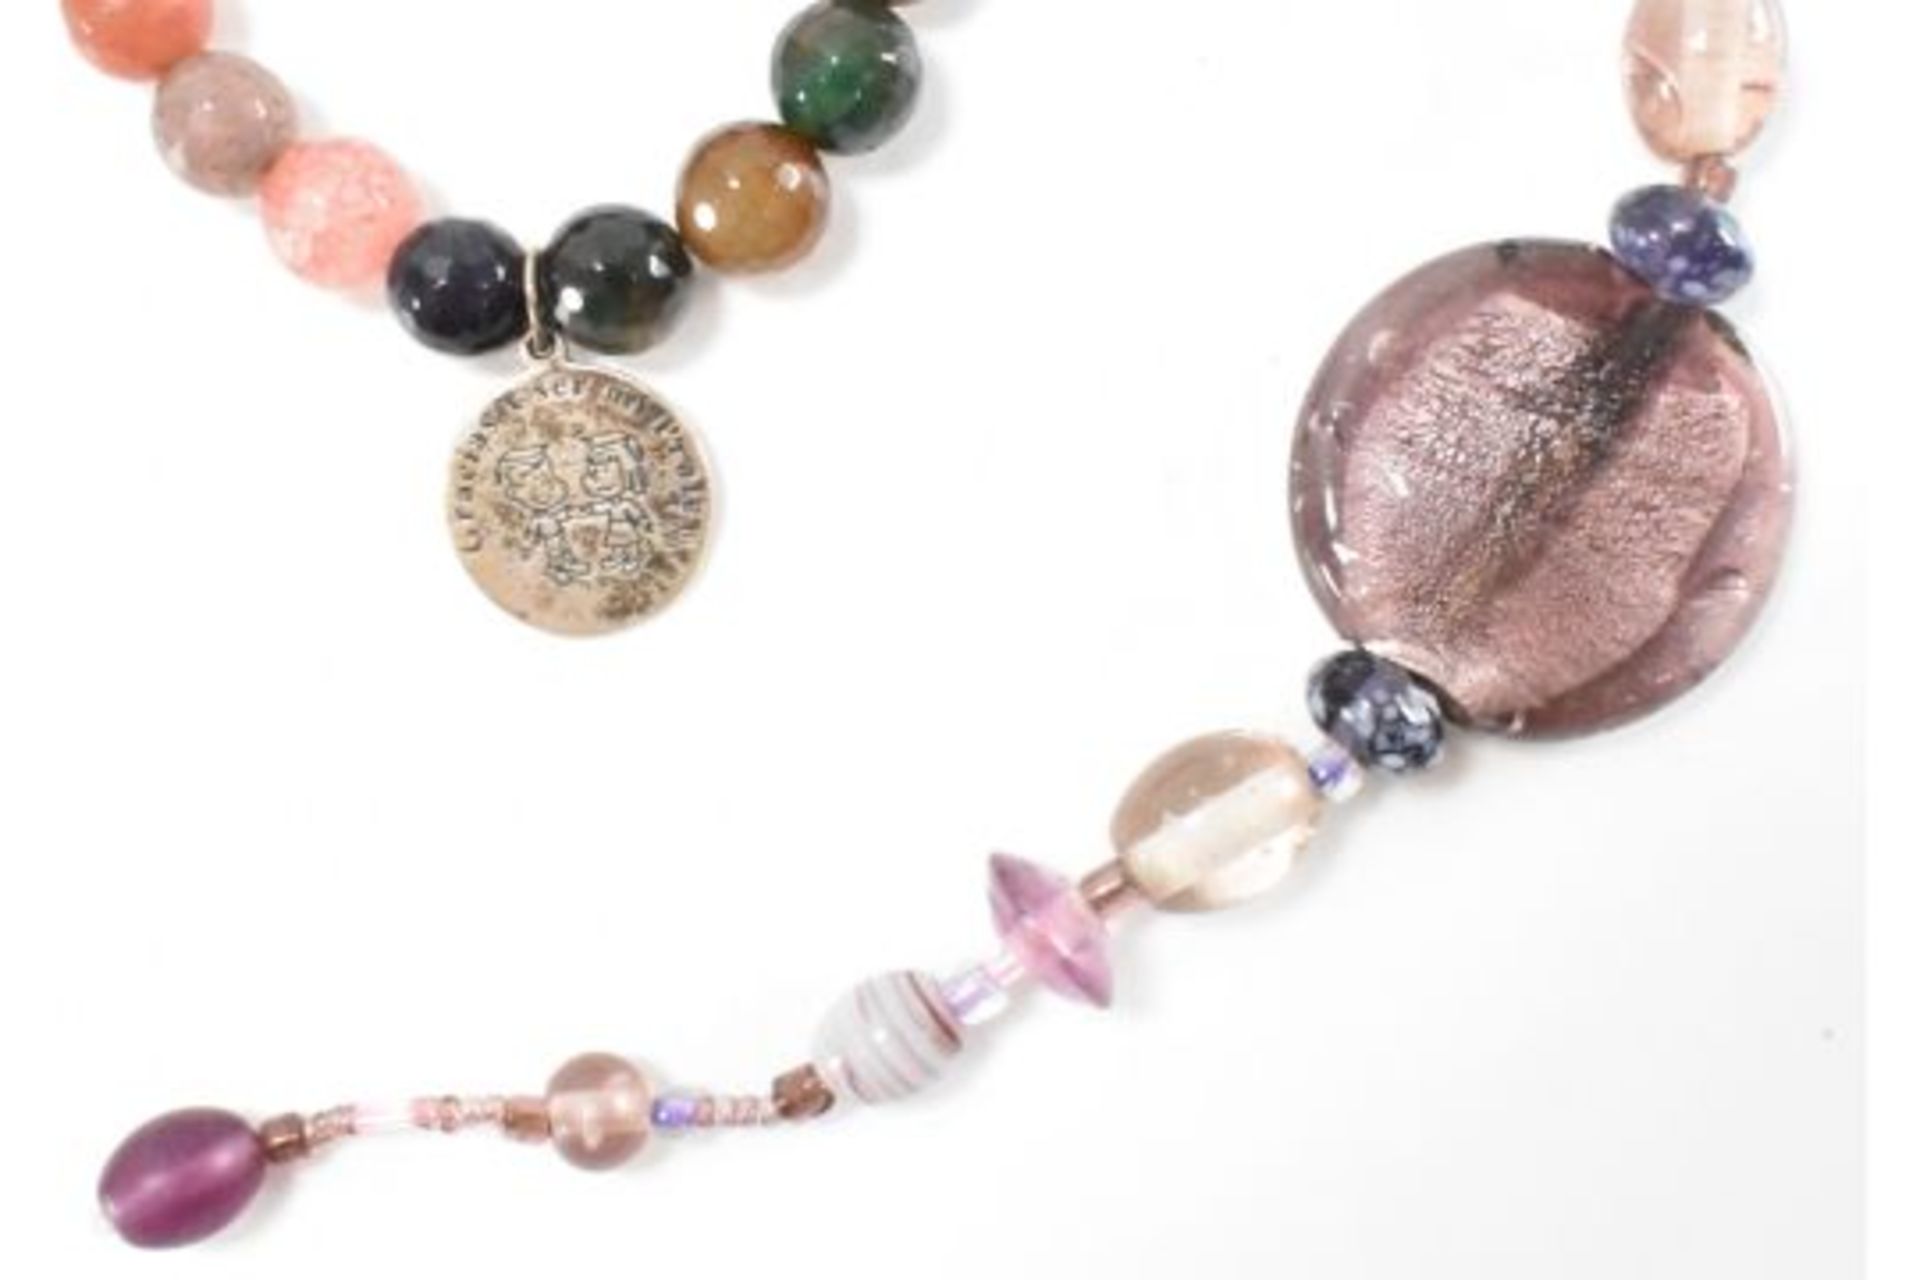 GROUP OF VINTAGE GLASS BEAD NECKLACES - Image 7 of 7